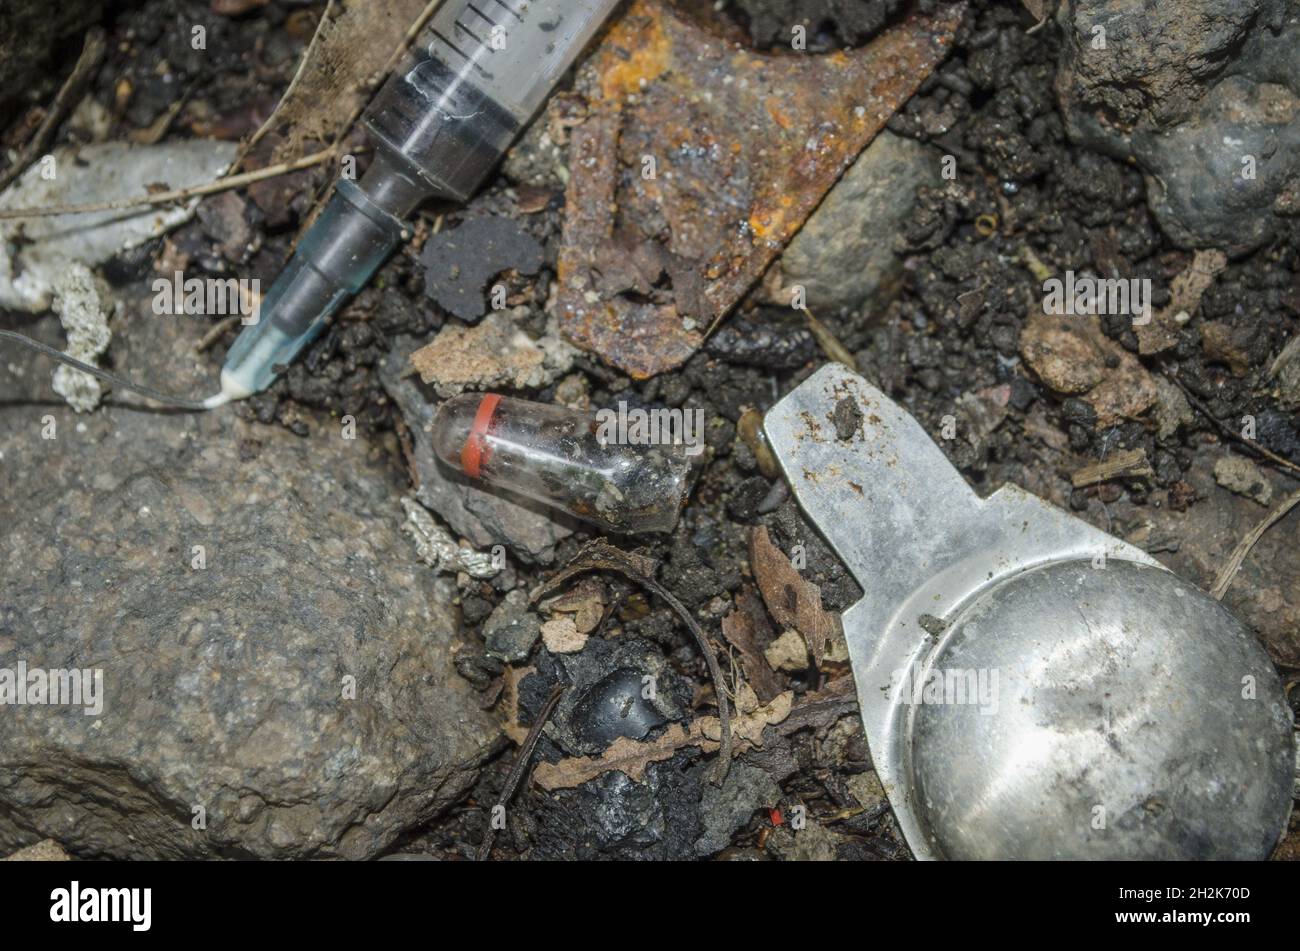 Closeup shot of a drug user's syringe and tackle on waste ground in the inner-city area. Stock Photo